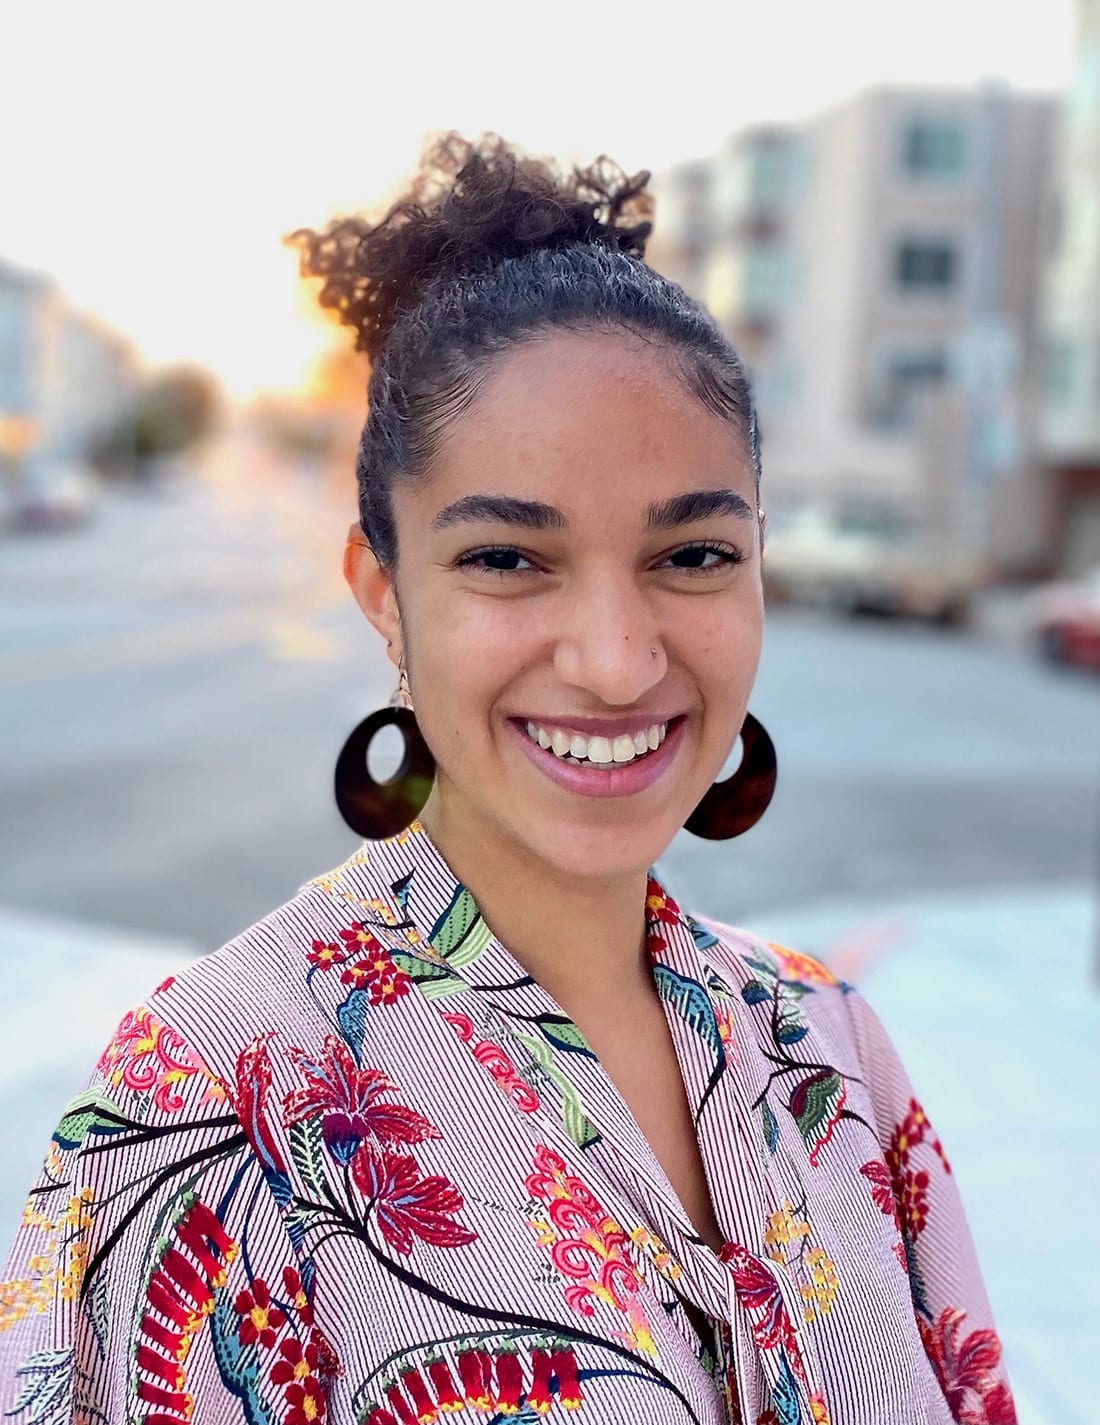 Suleima Mednick-Coles is cobbling together her interests as an amalgamation of multiple majors and minors, including international studies, sustainable development and environmental justice and African-American studies.